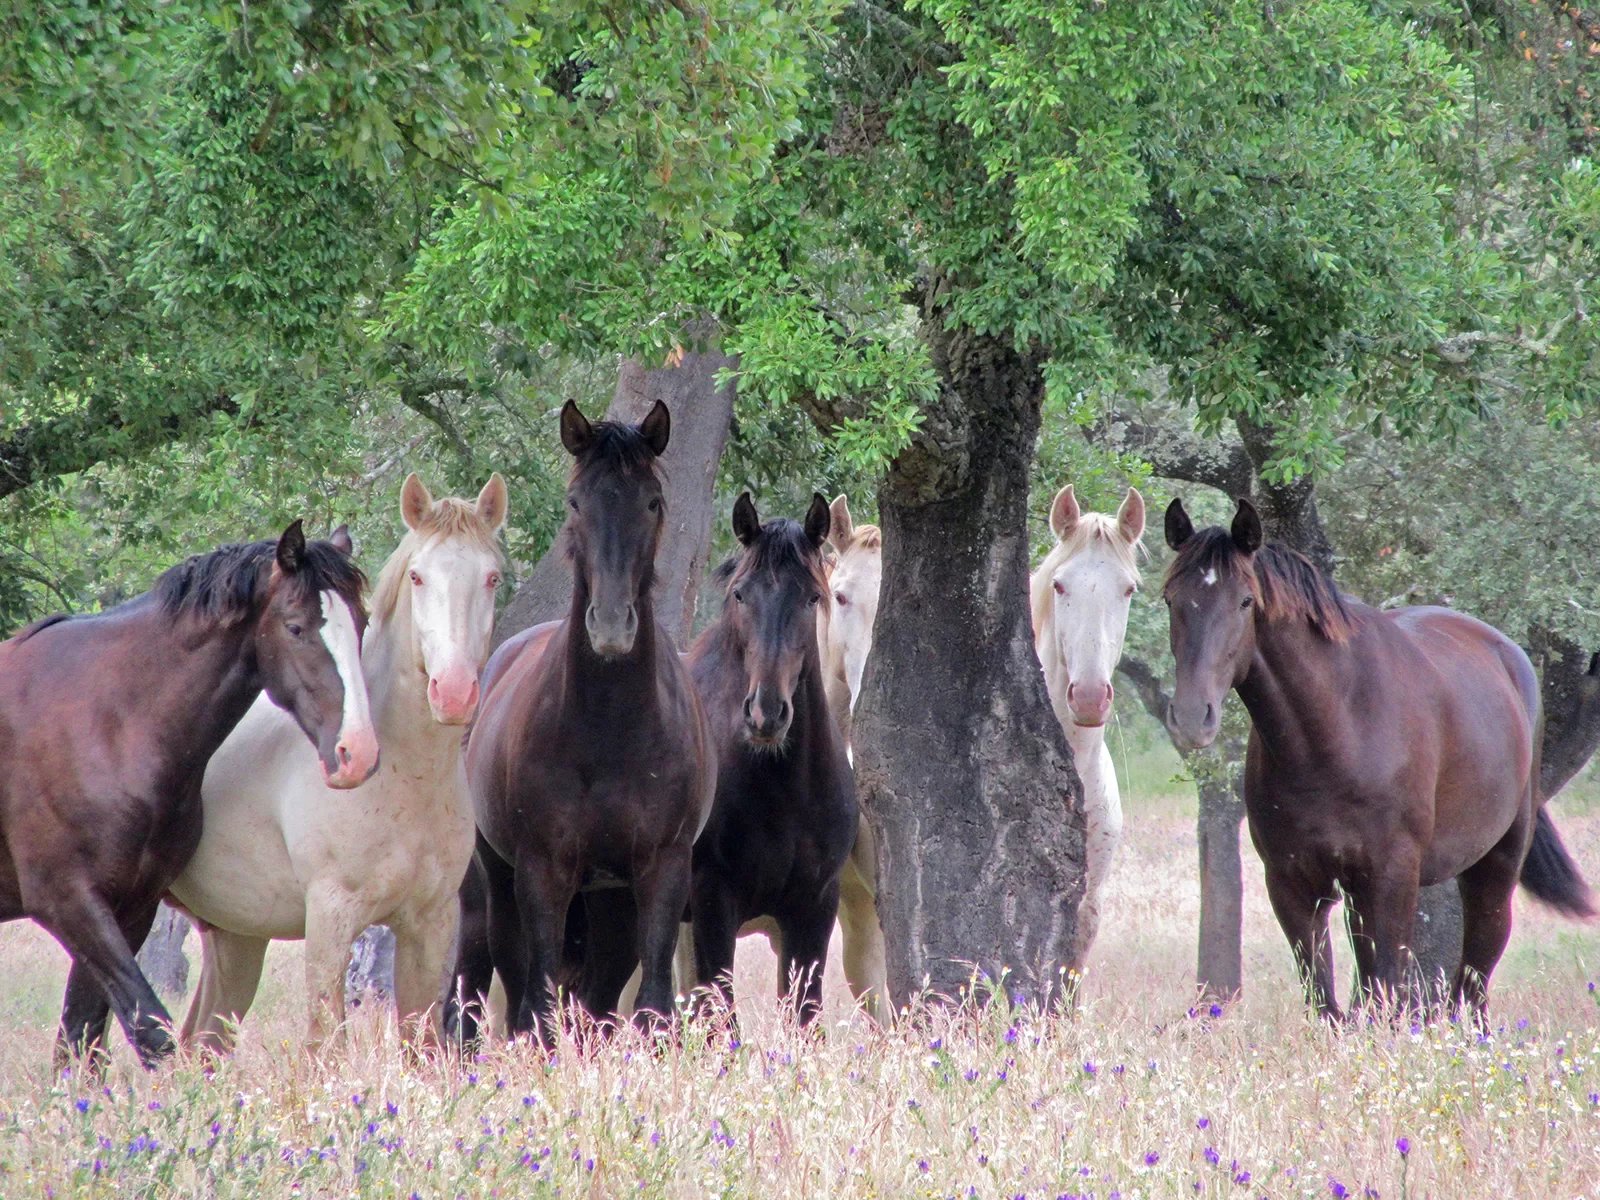 Pack of multi-colored horses in meadow under tree.